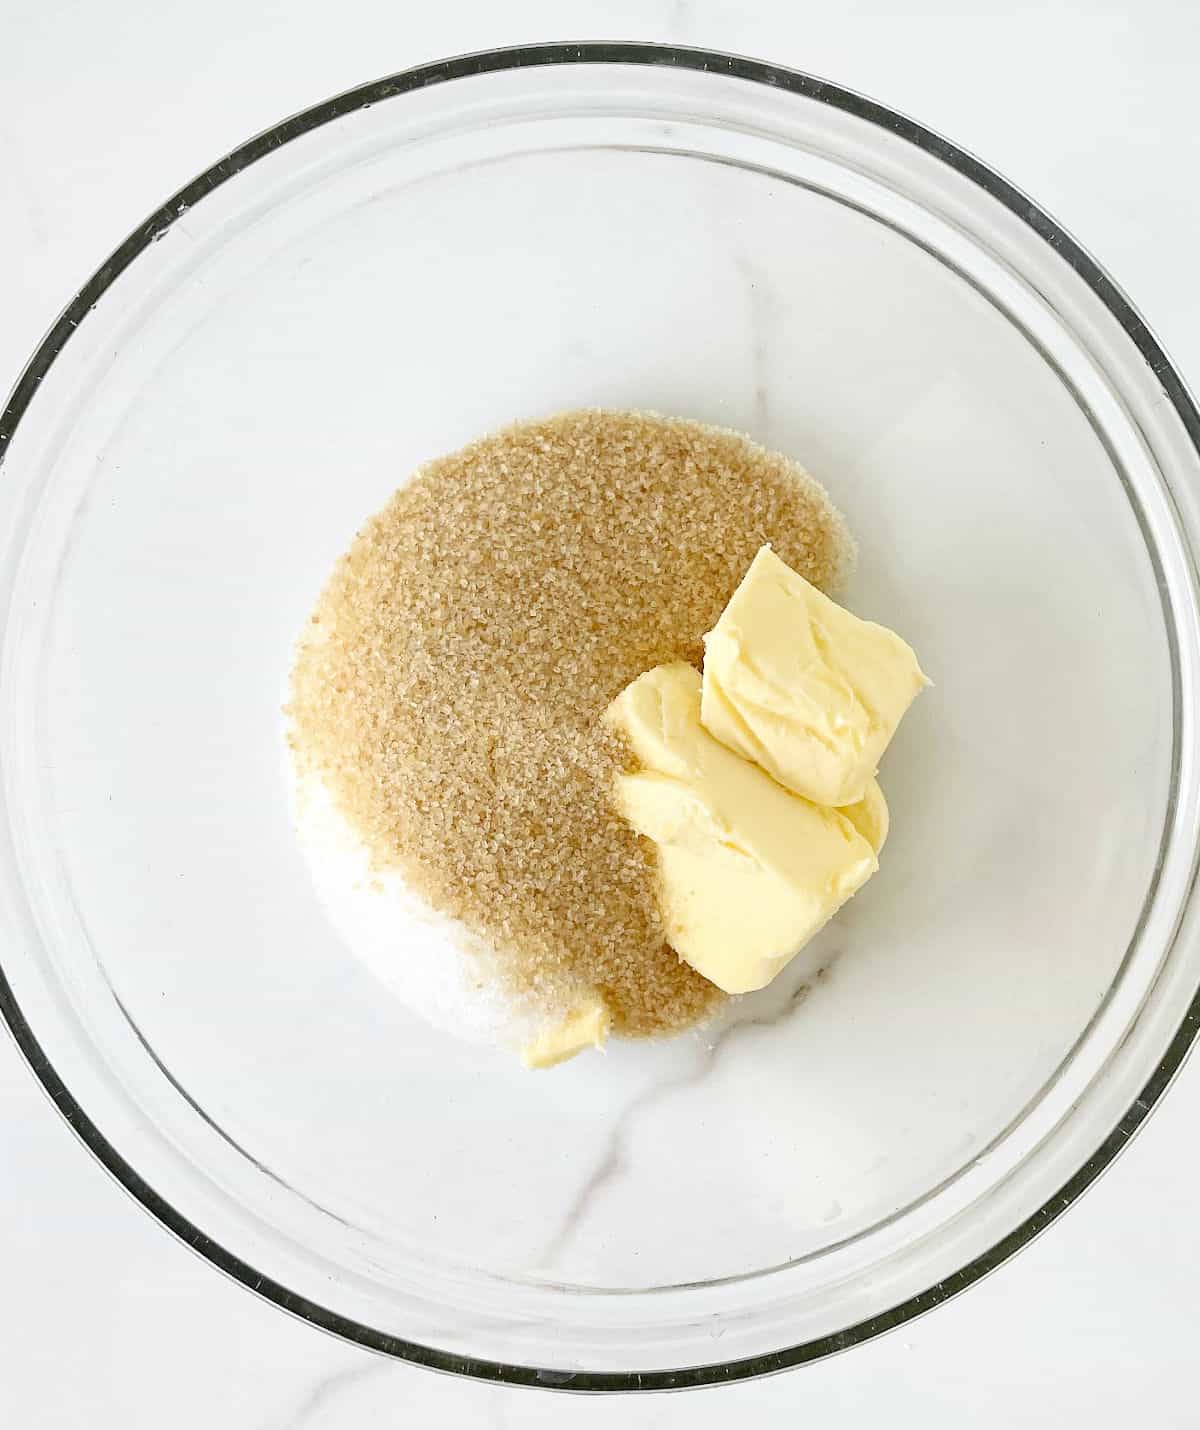 Top view of brown sugar and butter in a glass bowl on a white surface.